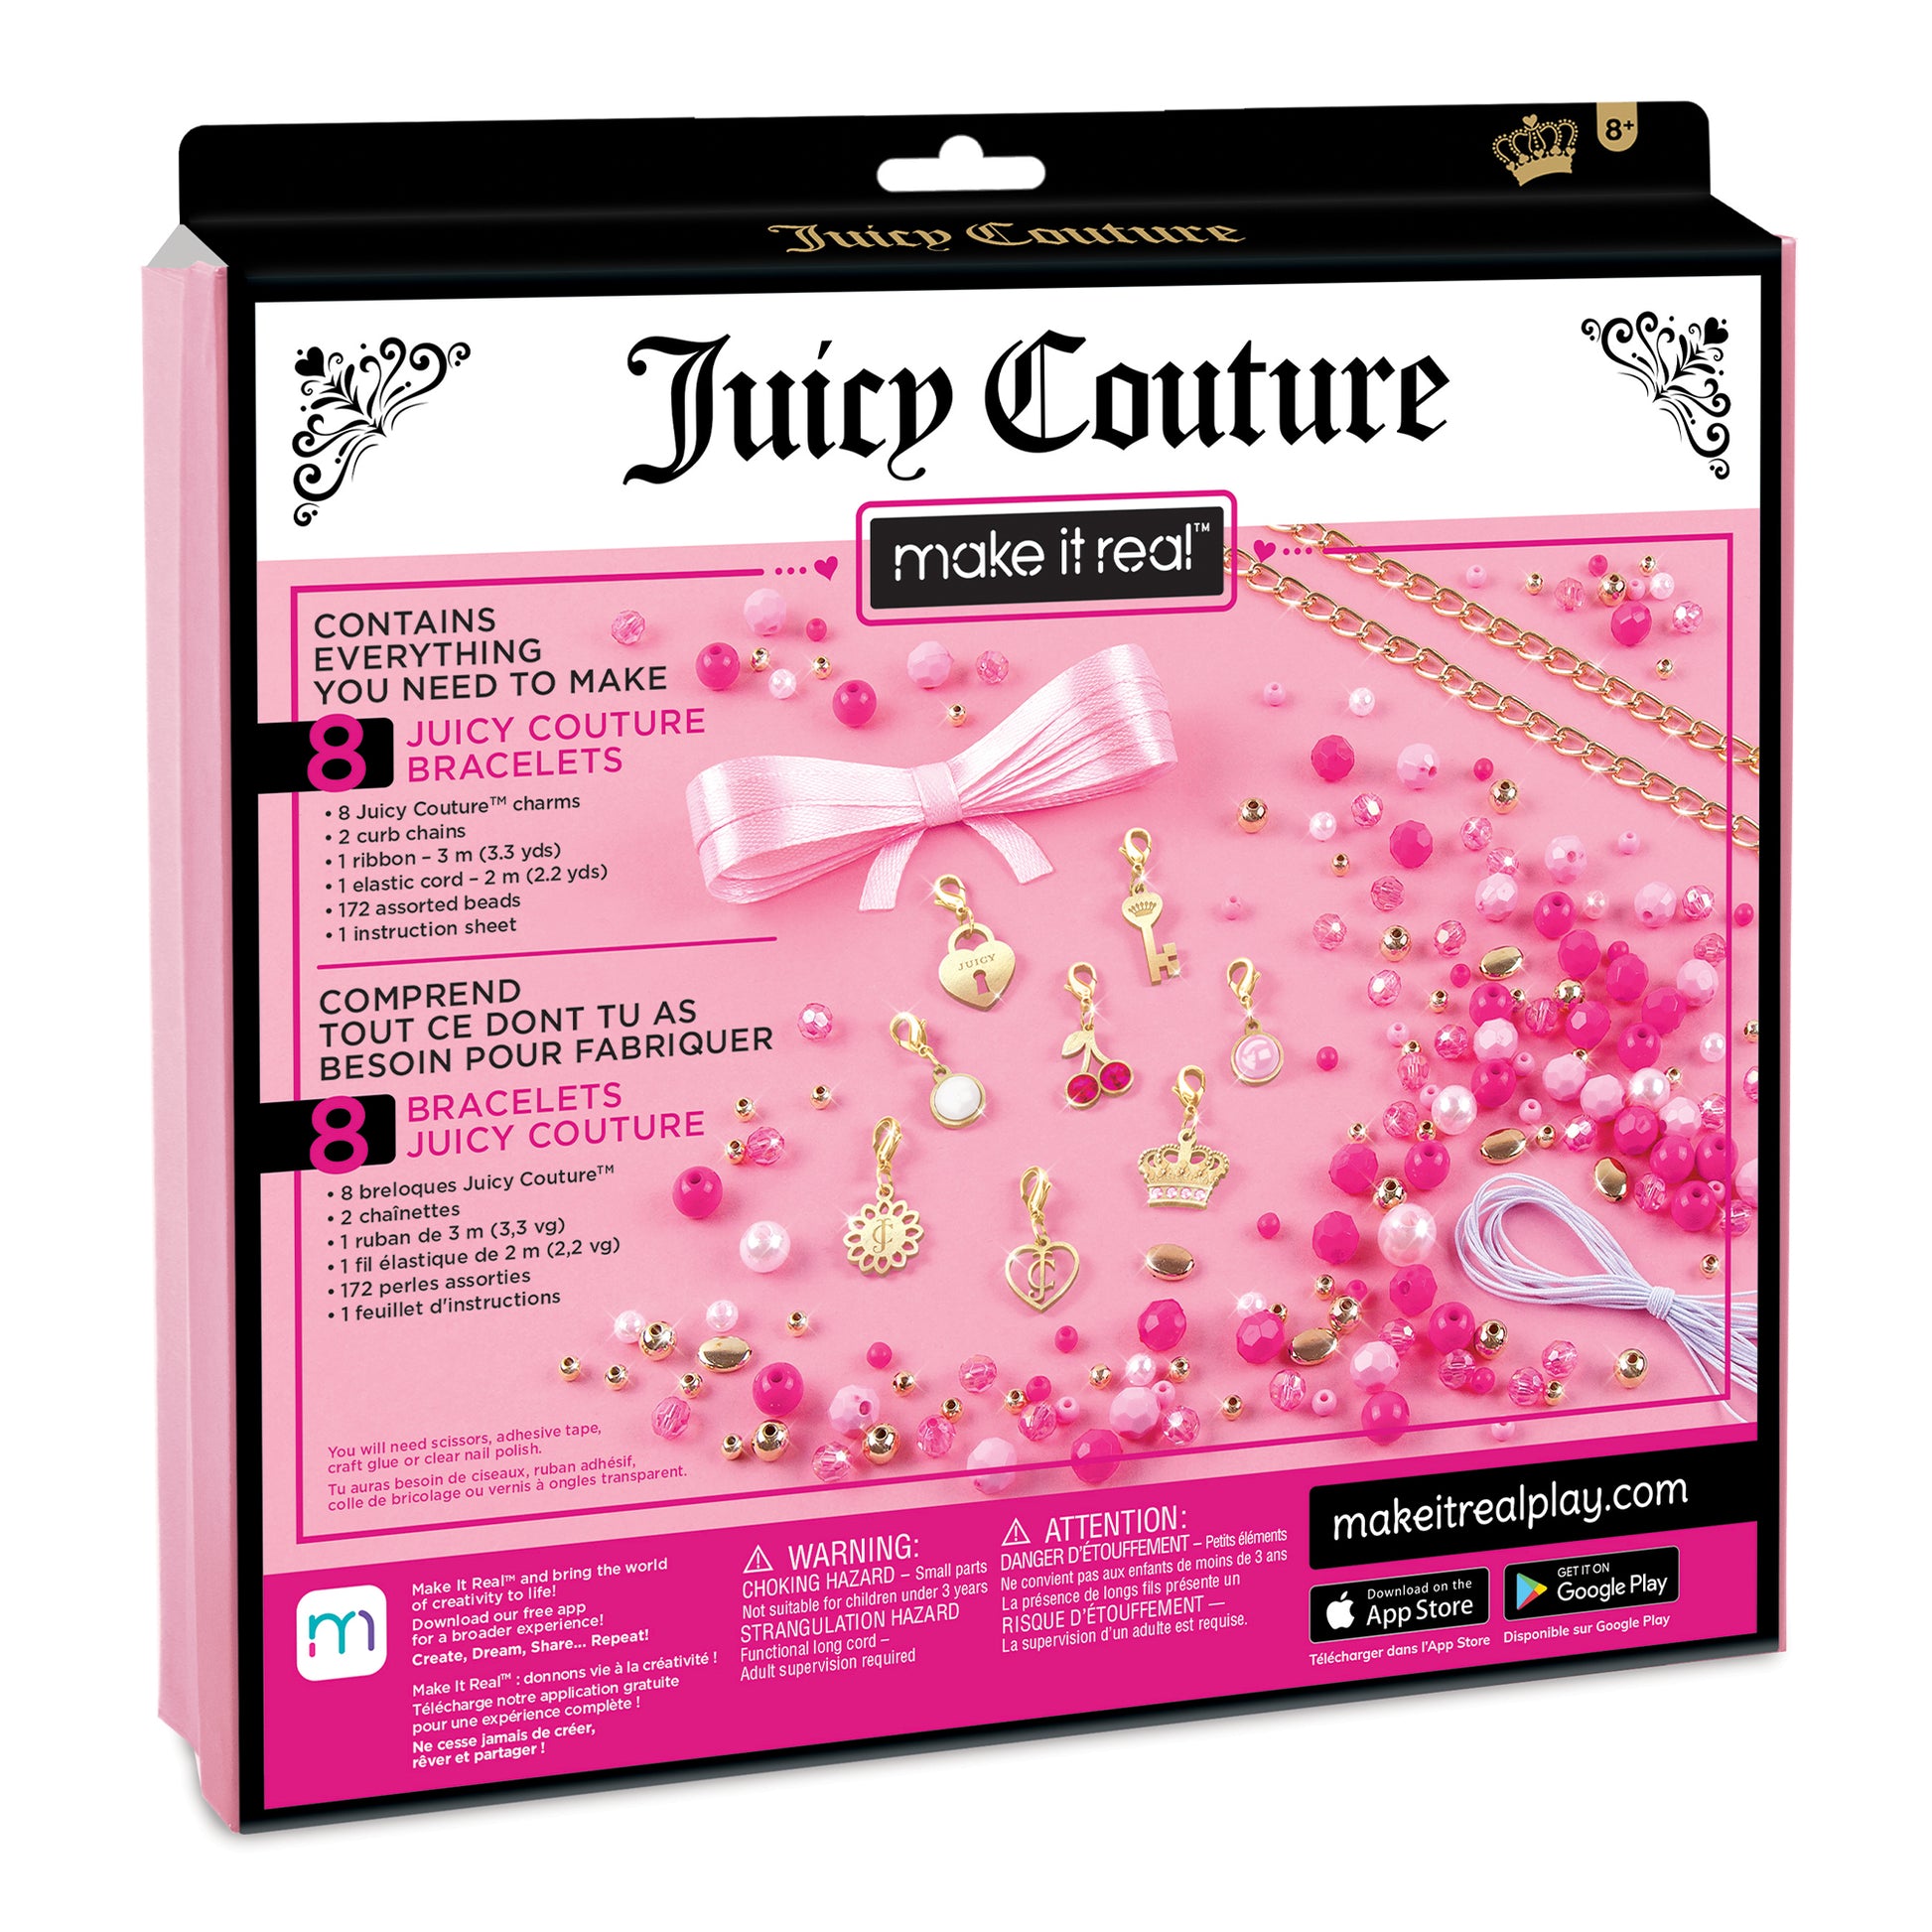 Juicy Couture™ Perfectly Pink Bracelets – Make It Real